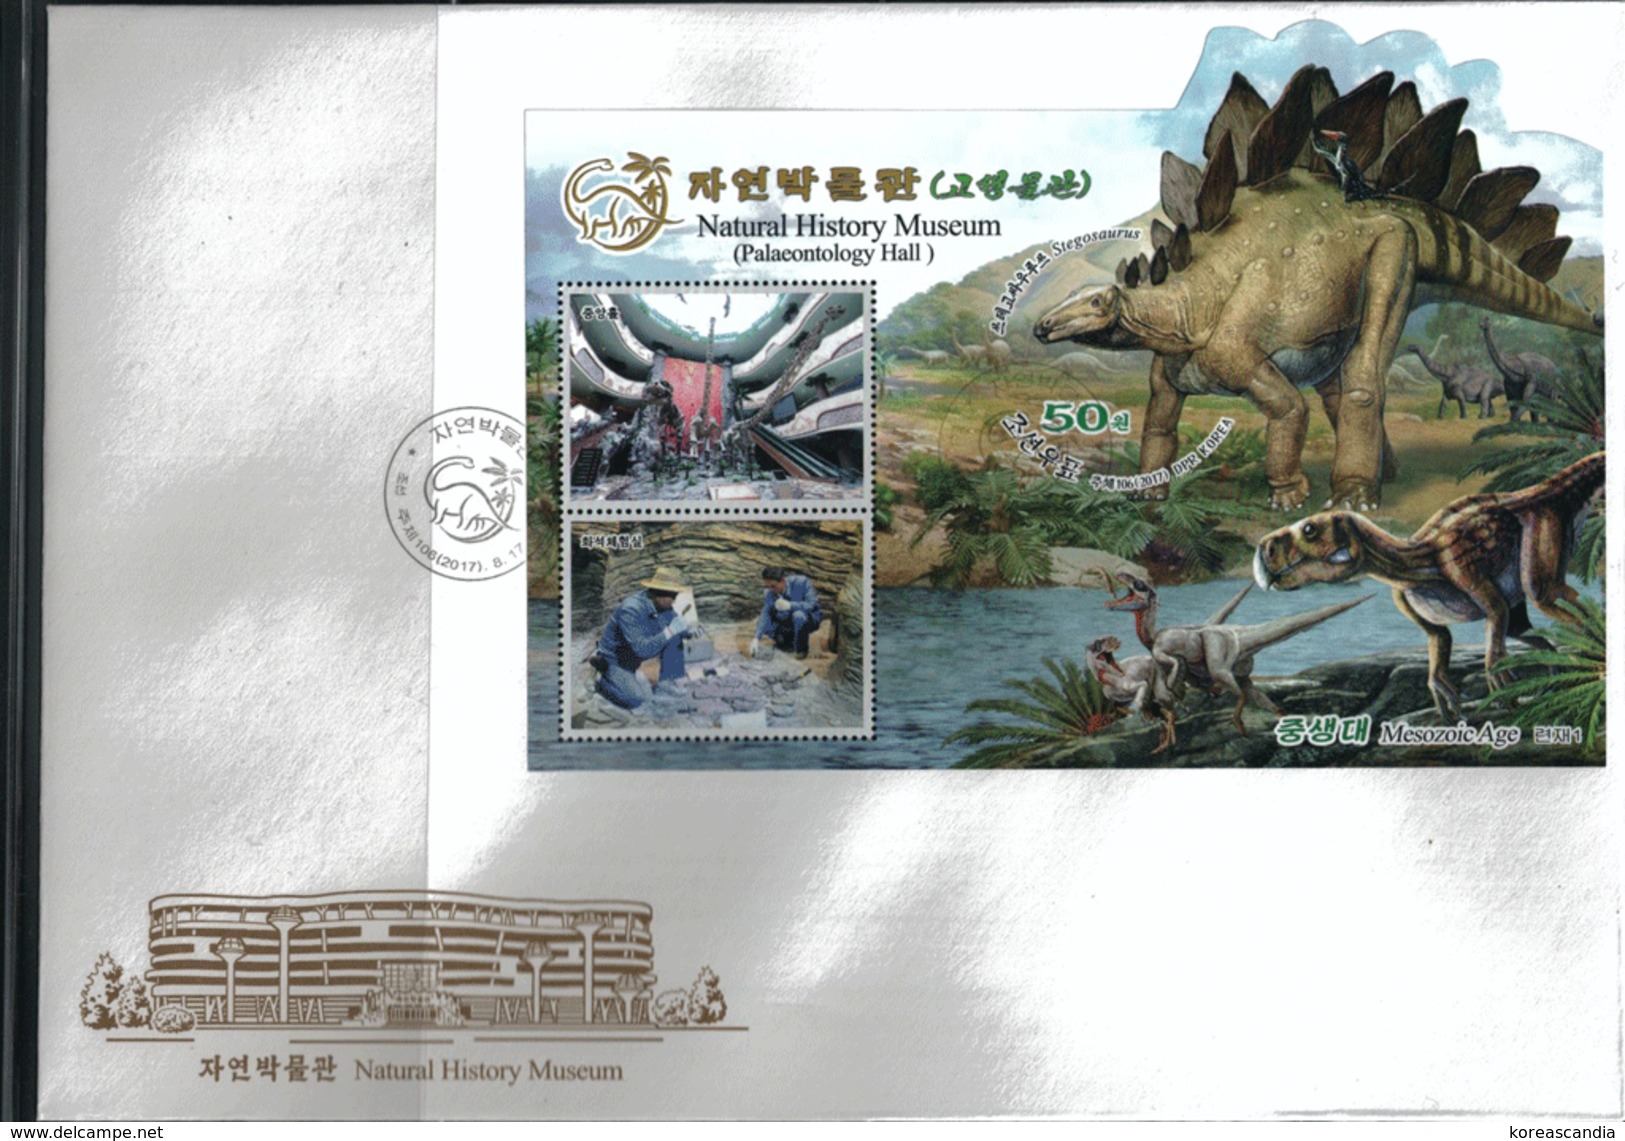 NORTH KOREA 2017 NATIONAL HISTORY MUSEUM PALAEONTOLOGY HALL DINOSAURS SOUVENIR SHEET (III) IMPERFORATED FDC - Préhistoriques